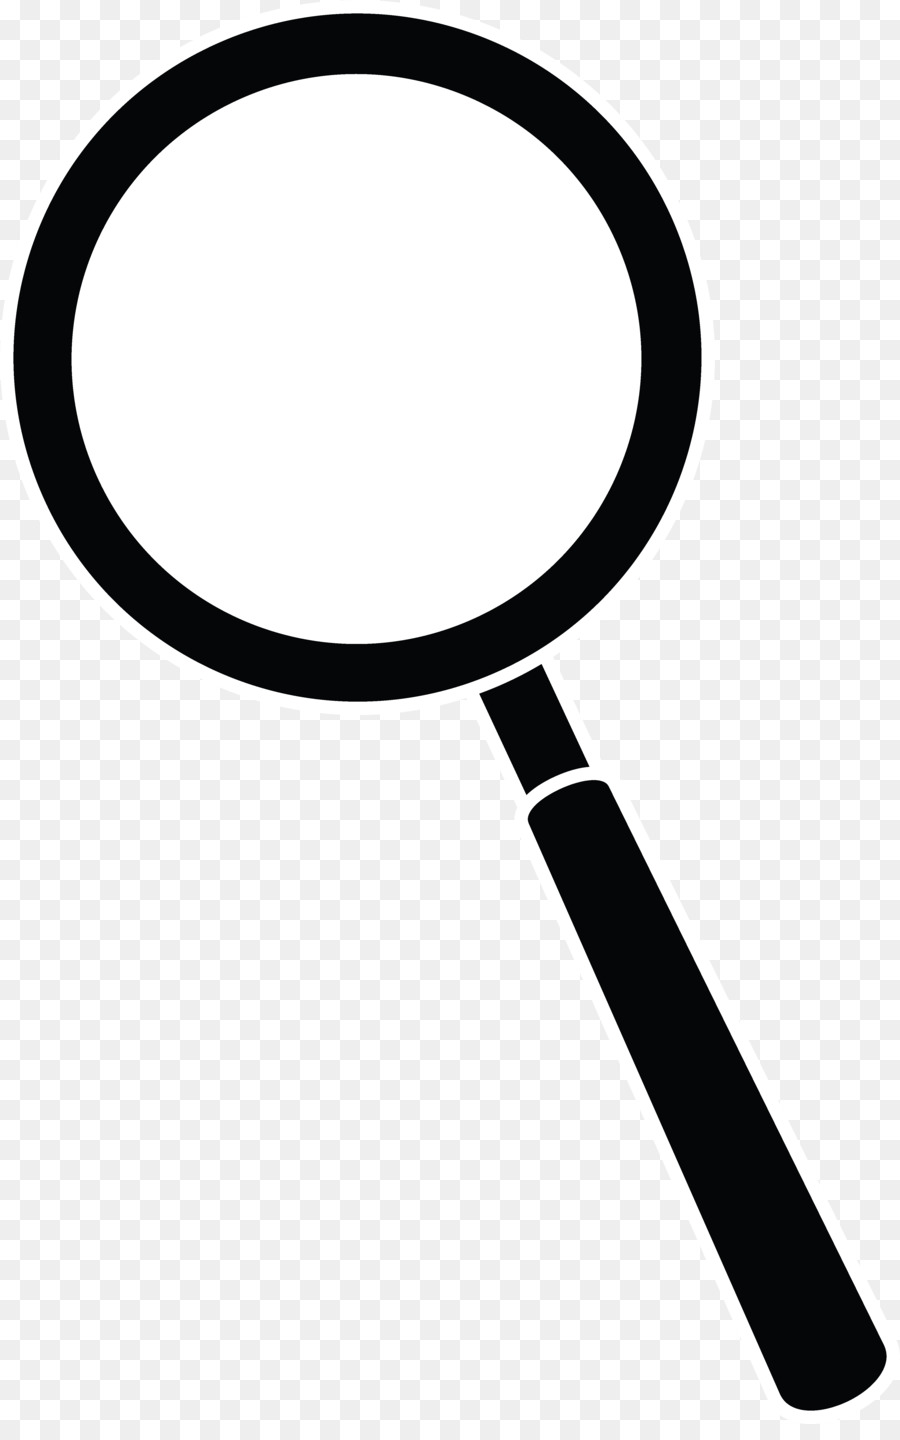 Magnifying glass Clip art - Magnifier Cliparts White png download - 4166*6590 - Free Transparent Magnifying Glass png Download.